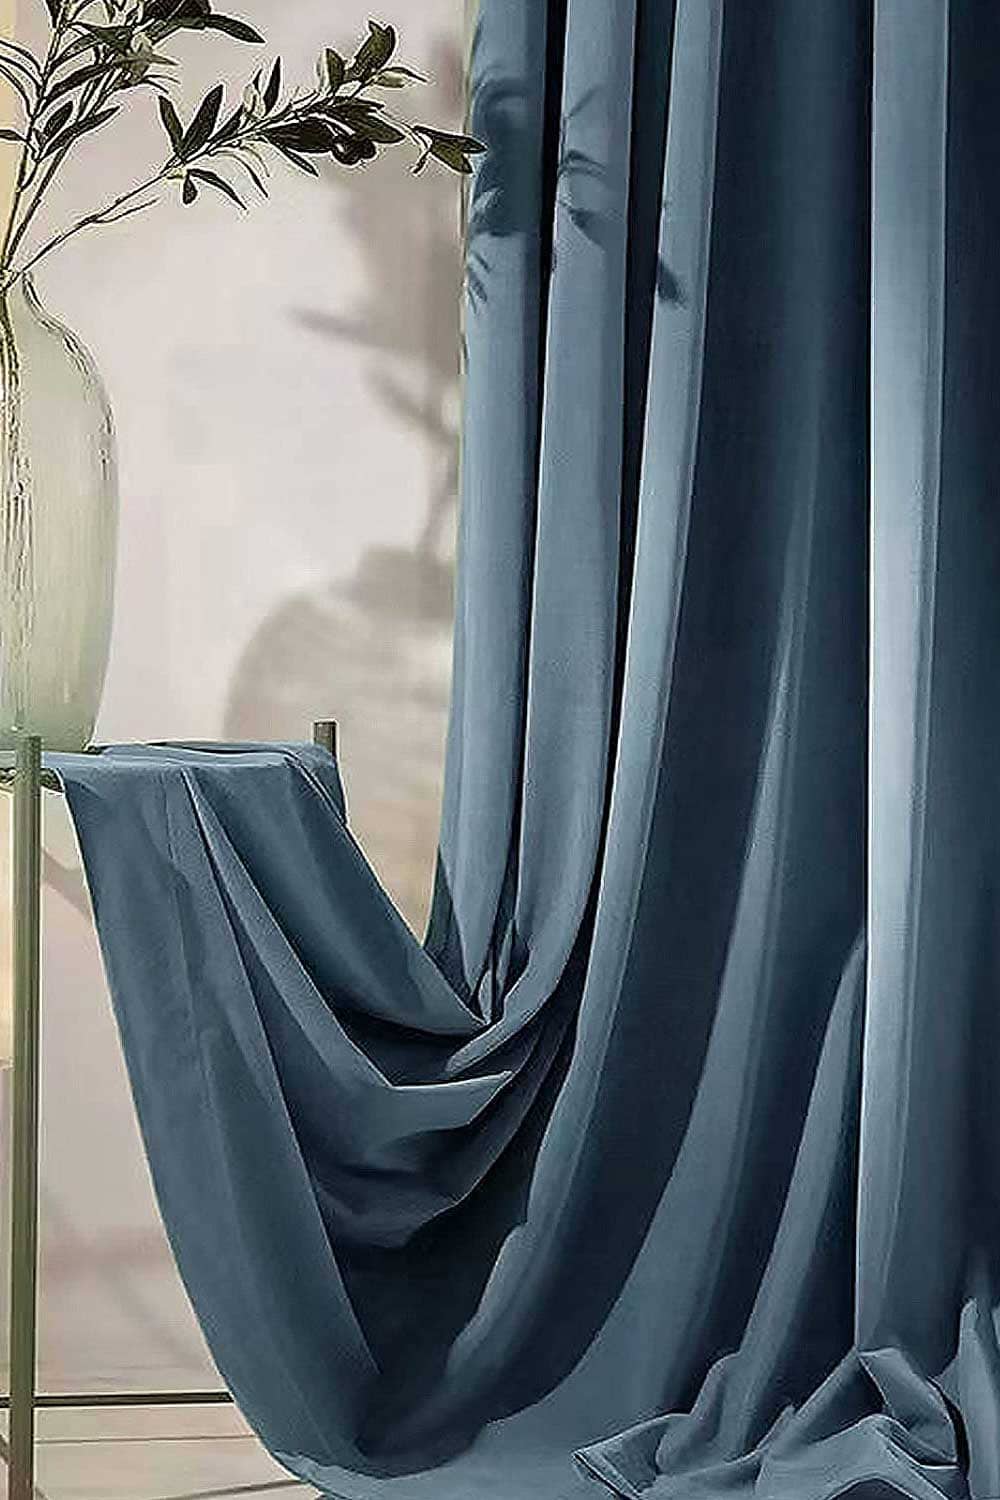 Where to buy cheap curtains and drapes online that look expensive